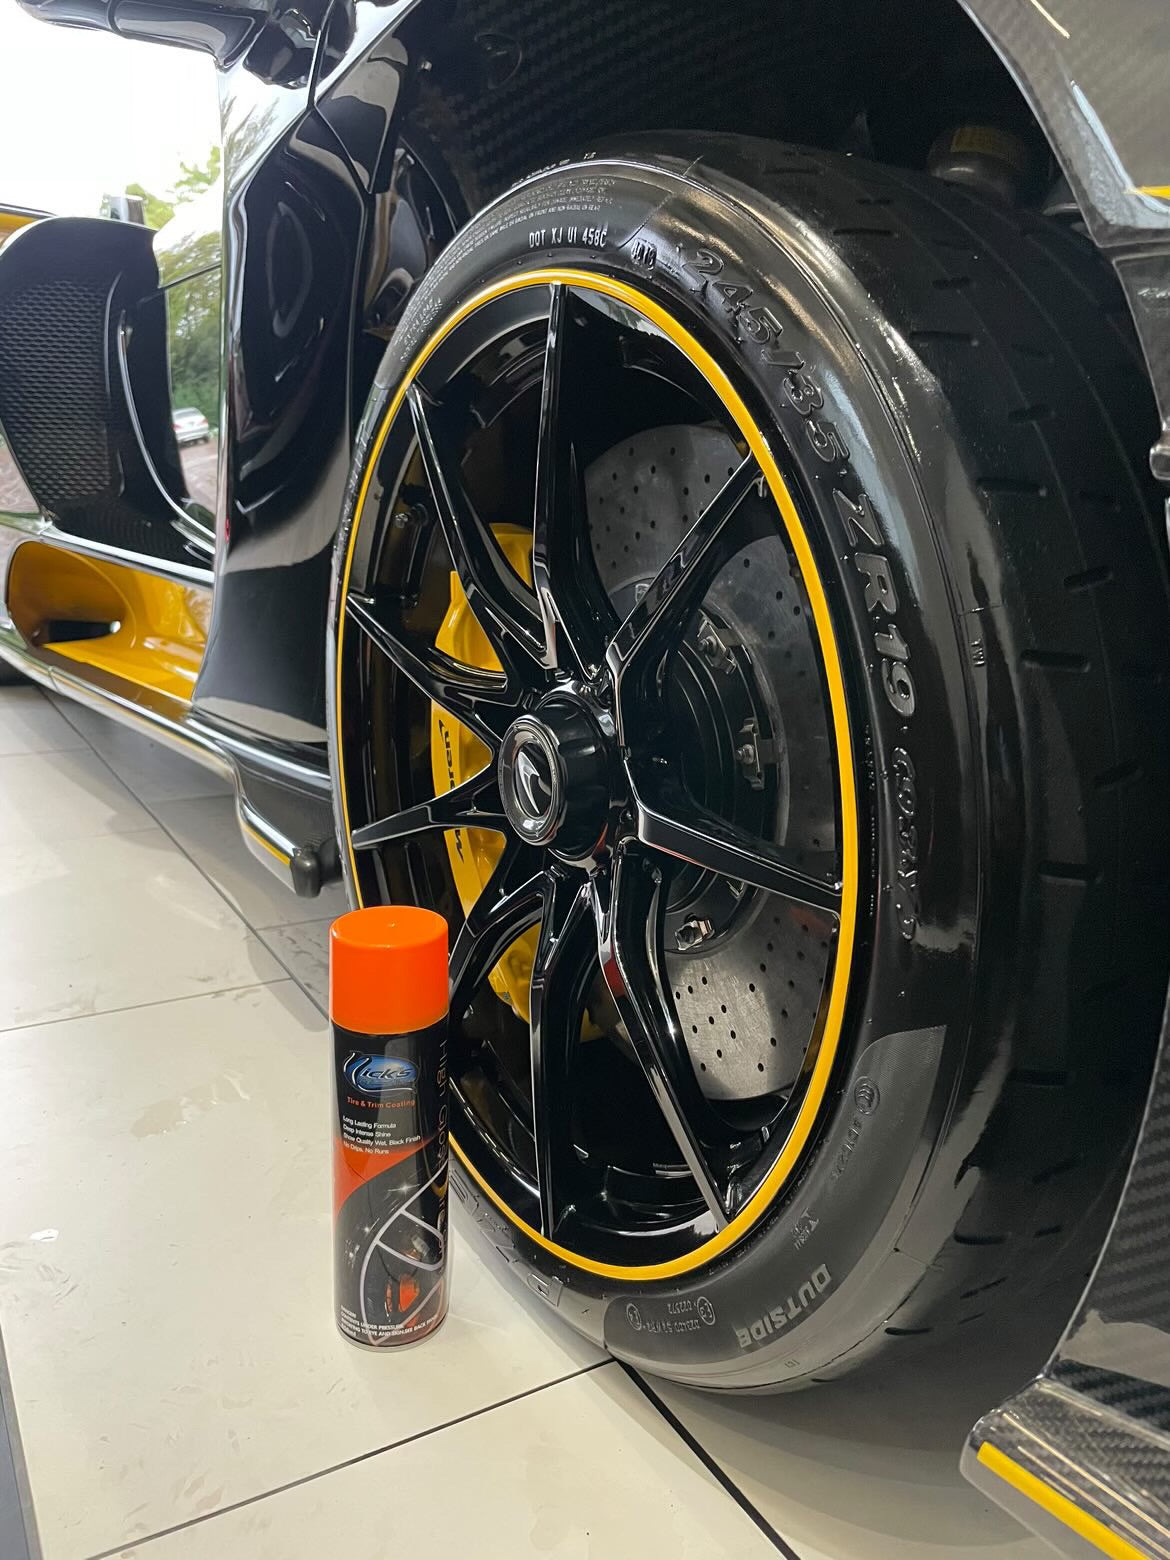 Best tire shine / gloss that's easy to apply to sasquatch tires